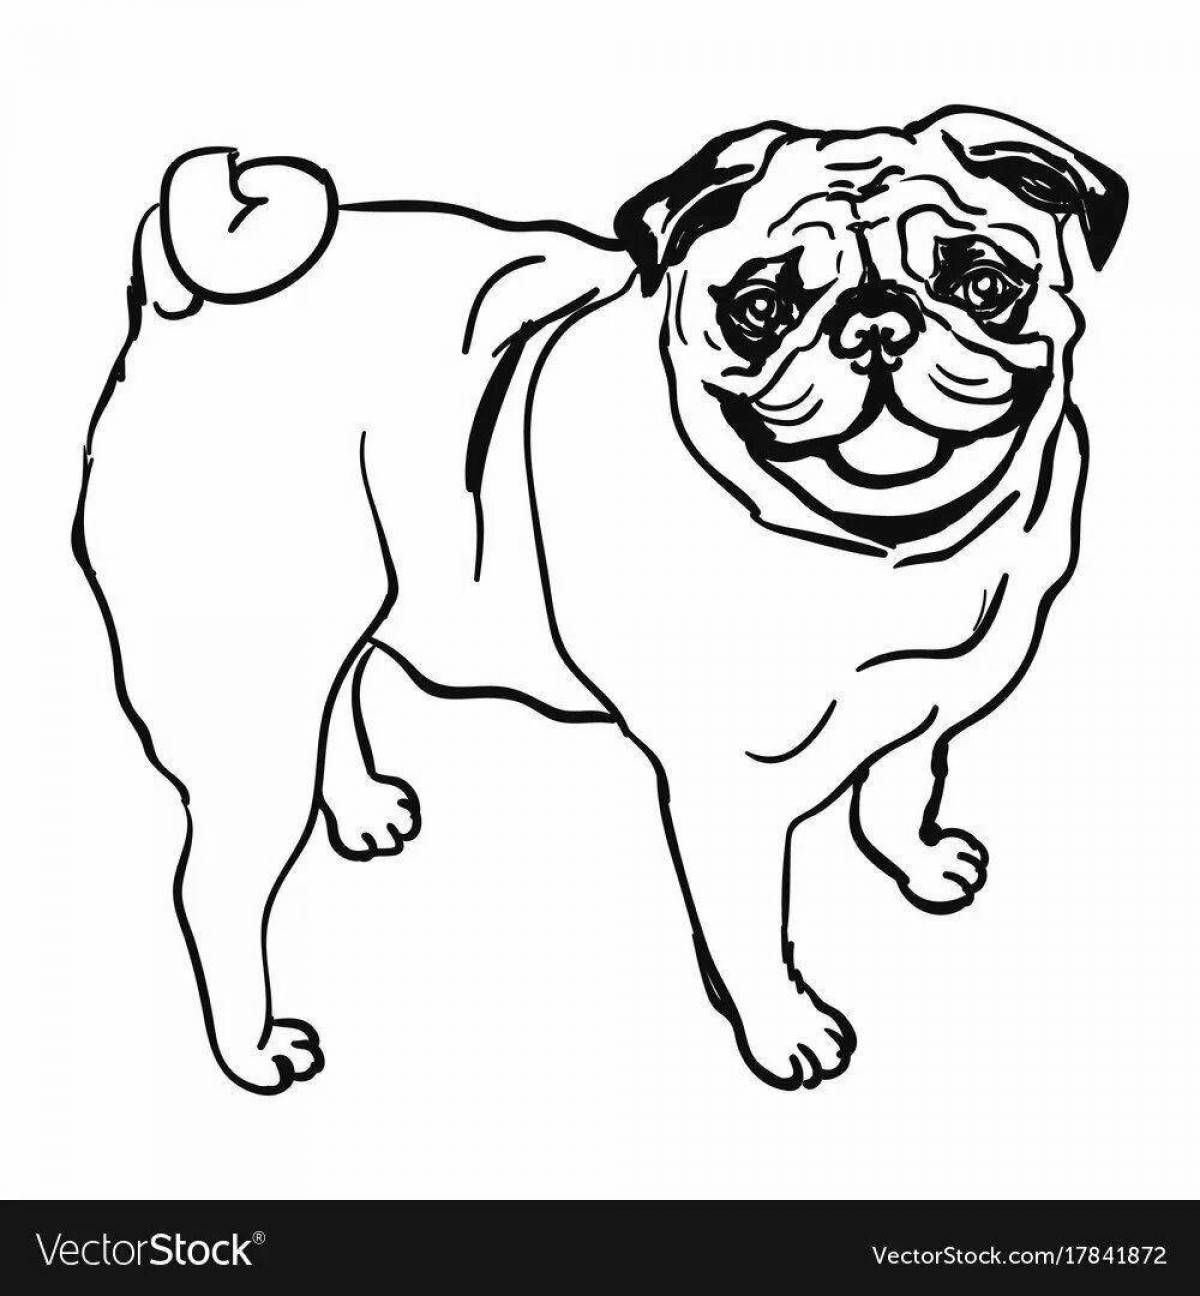 Coloring page magic pug for kids